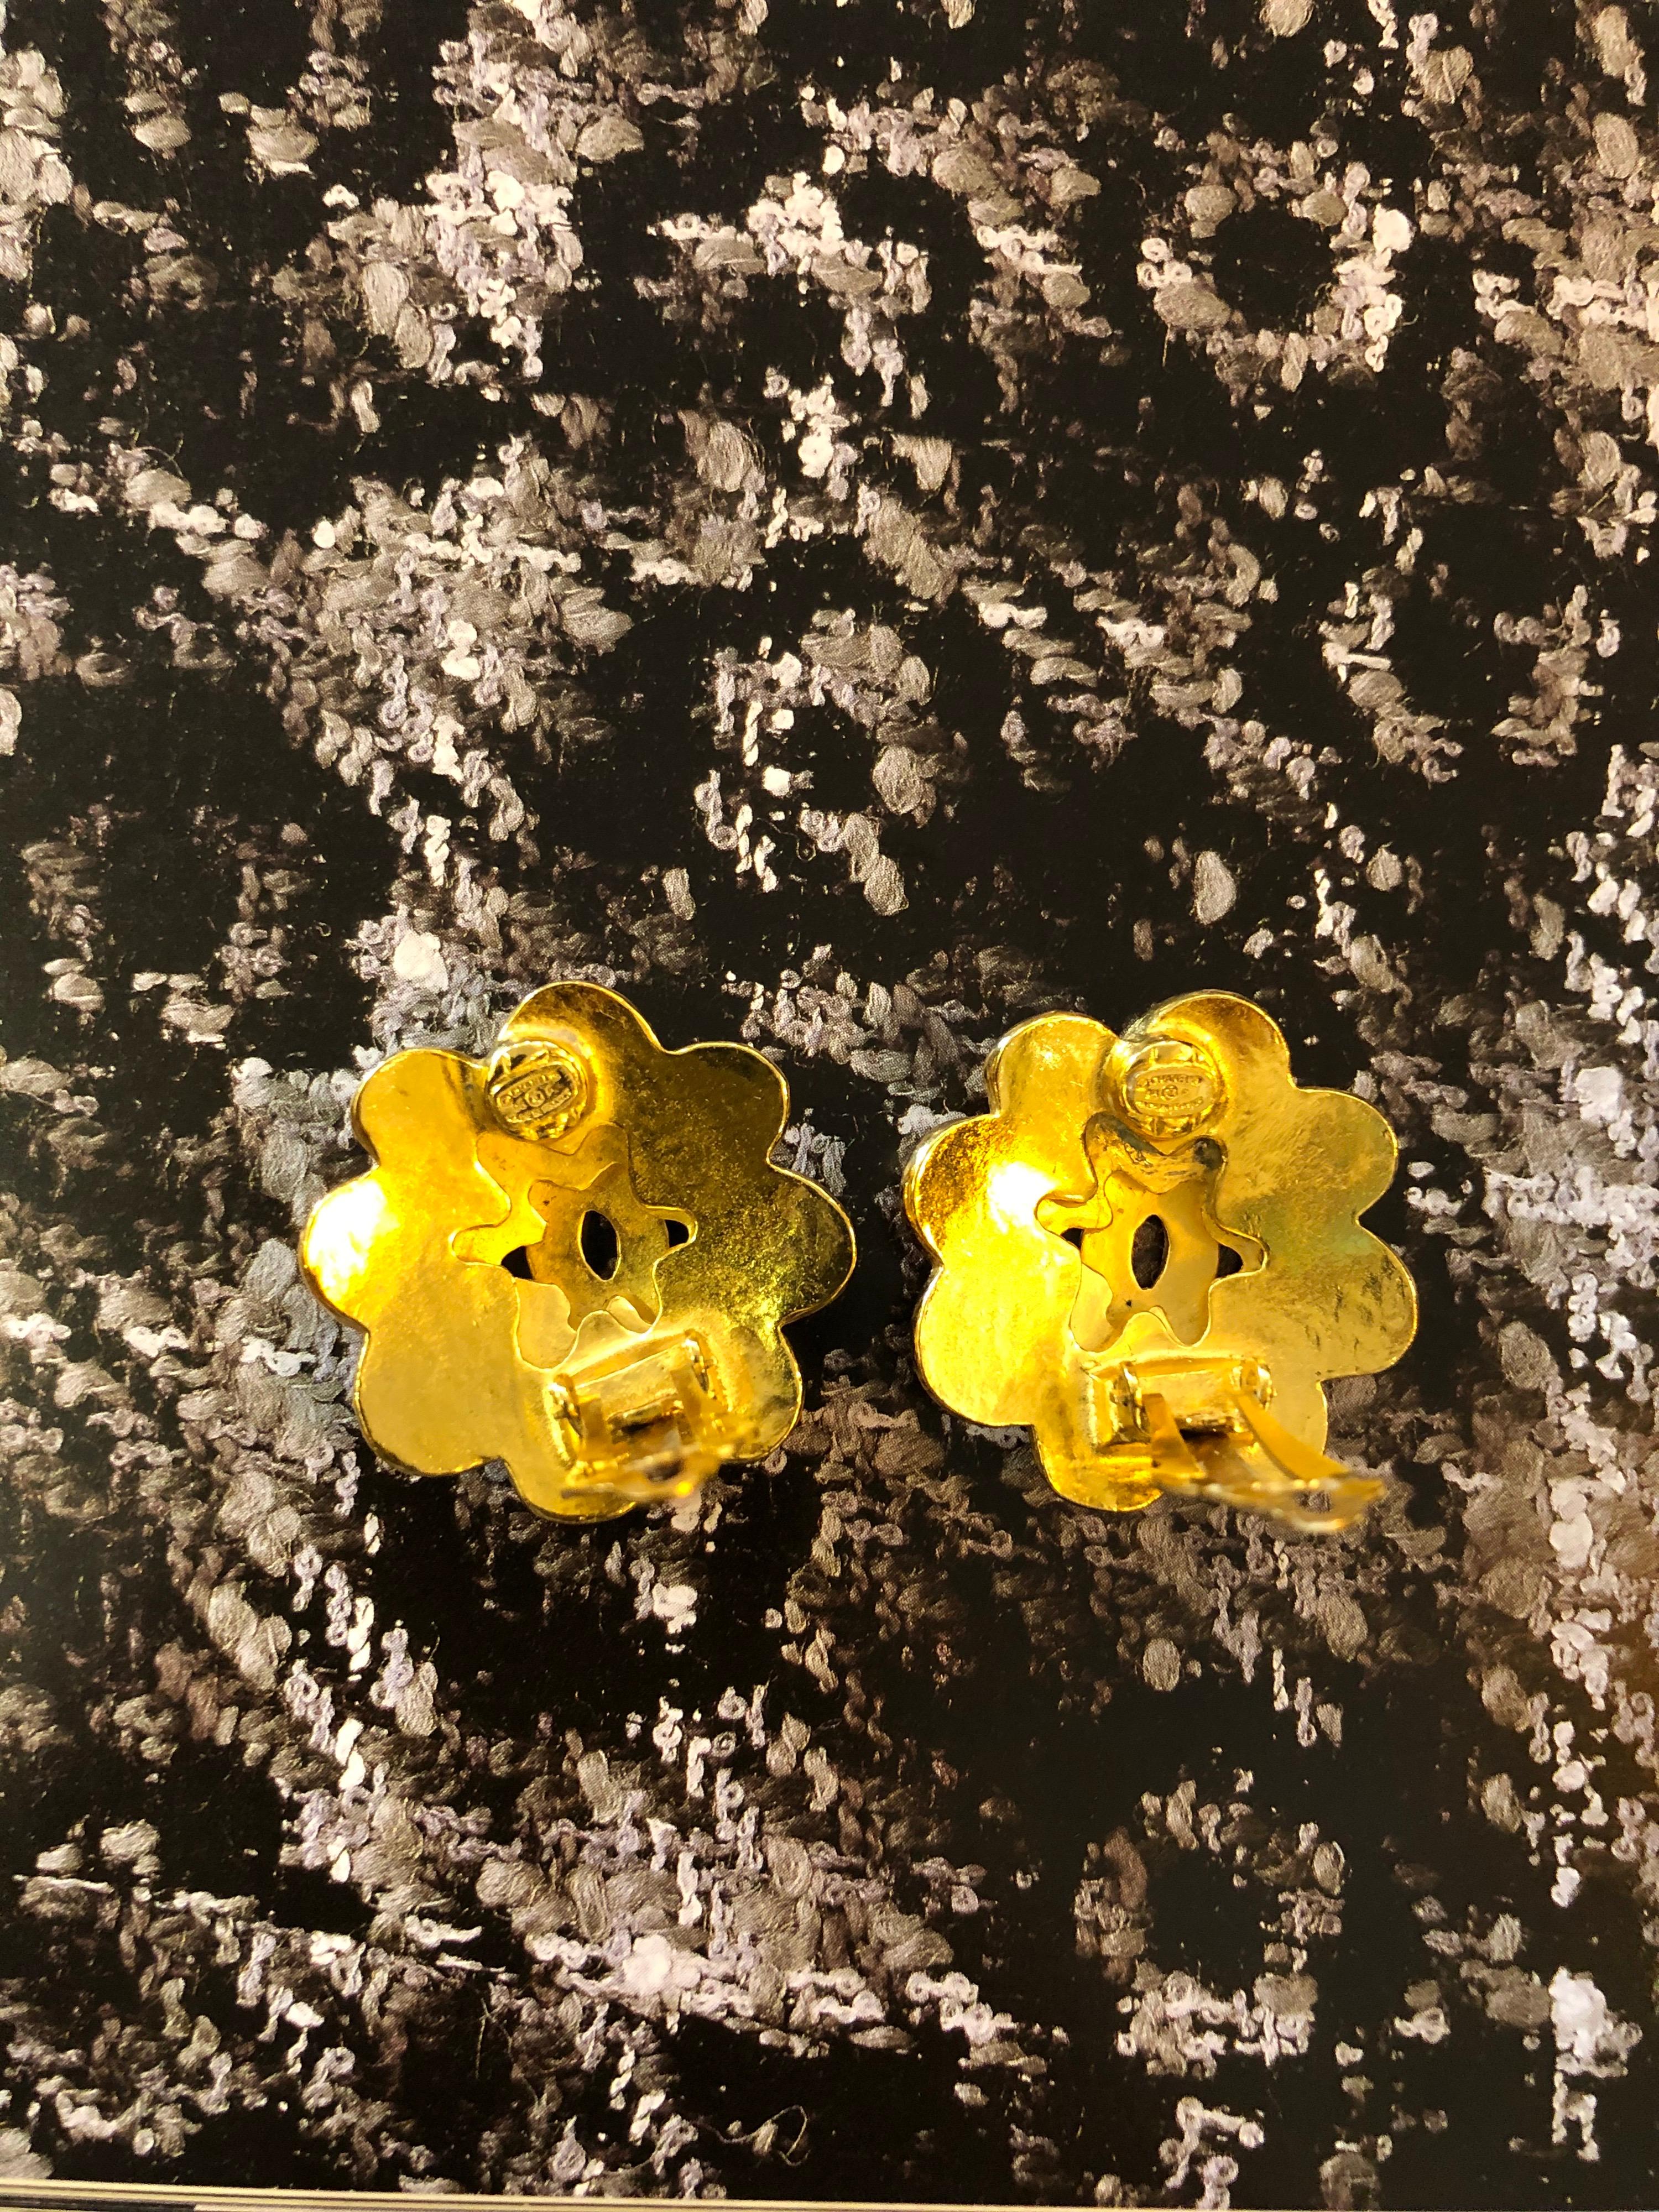 Pair of 1990s Chanel gold toned earclips featuring two camellia layers with a centered CC logo. Stamped Chanel 96P, made in France. Measures approximately 3cm. Clip in style. Come with box. 

Condition: Signs of wear consistent with age and normal